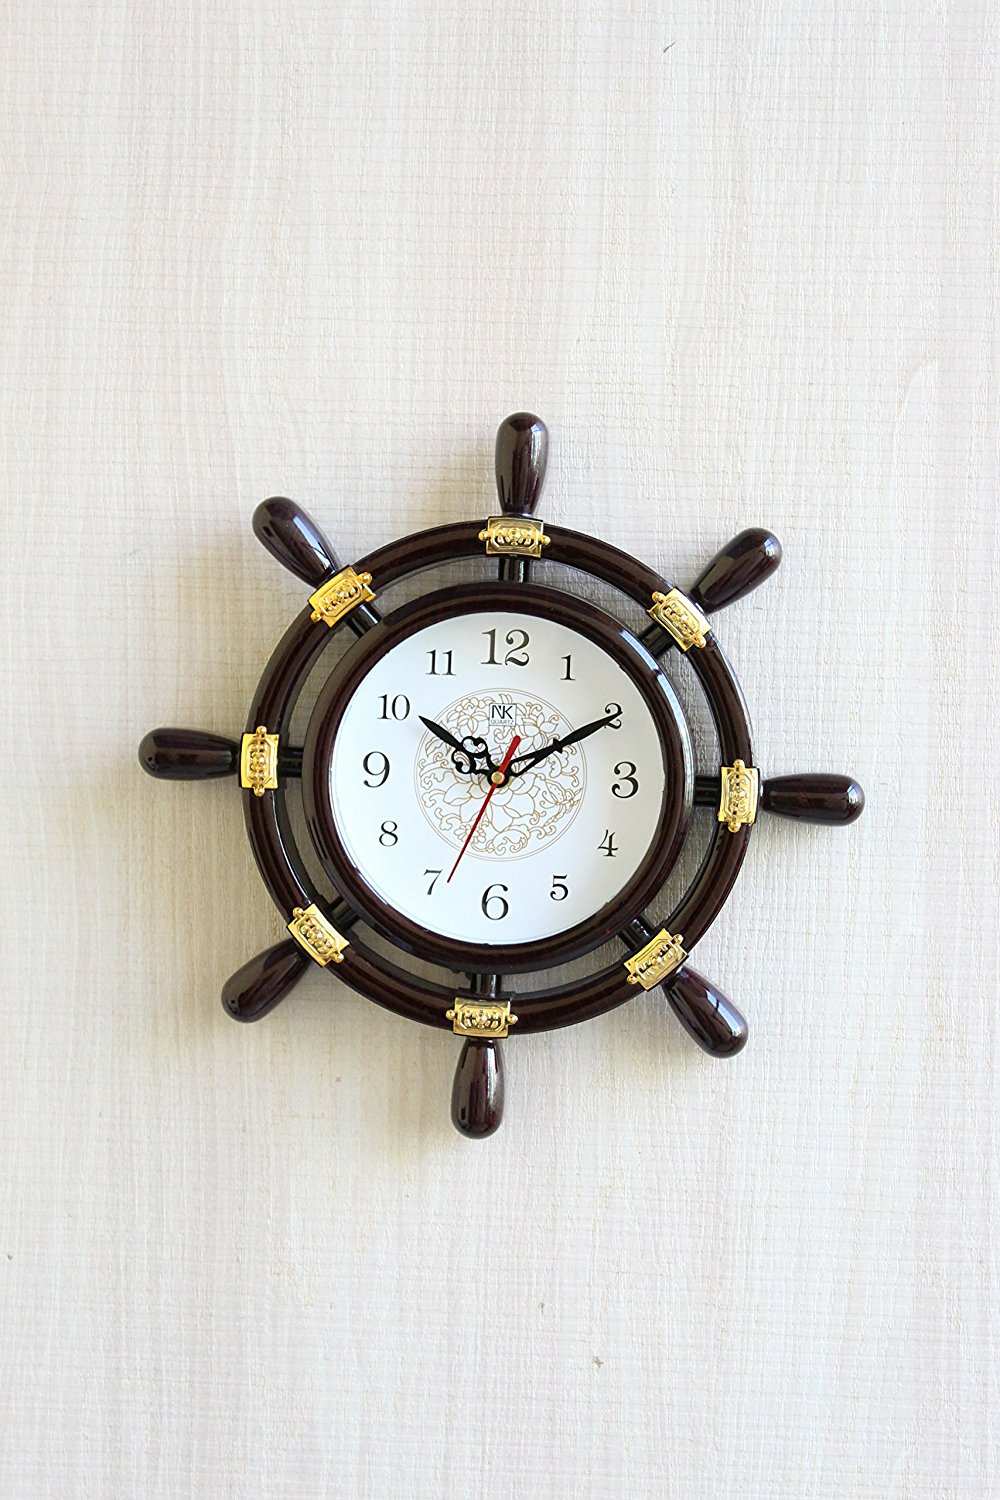 FunkyTradition Decorative Retro Round Ship Steering Shape Plastic Pendulum Wall Clock for Home Office Decor and Gifts 32 CM Tall - FunkyTradition